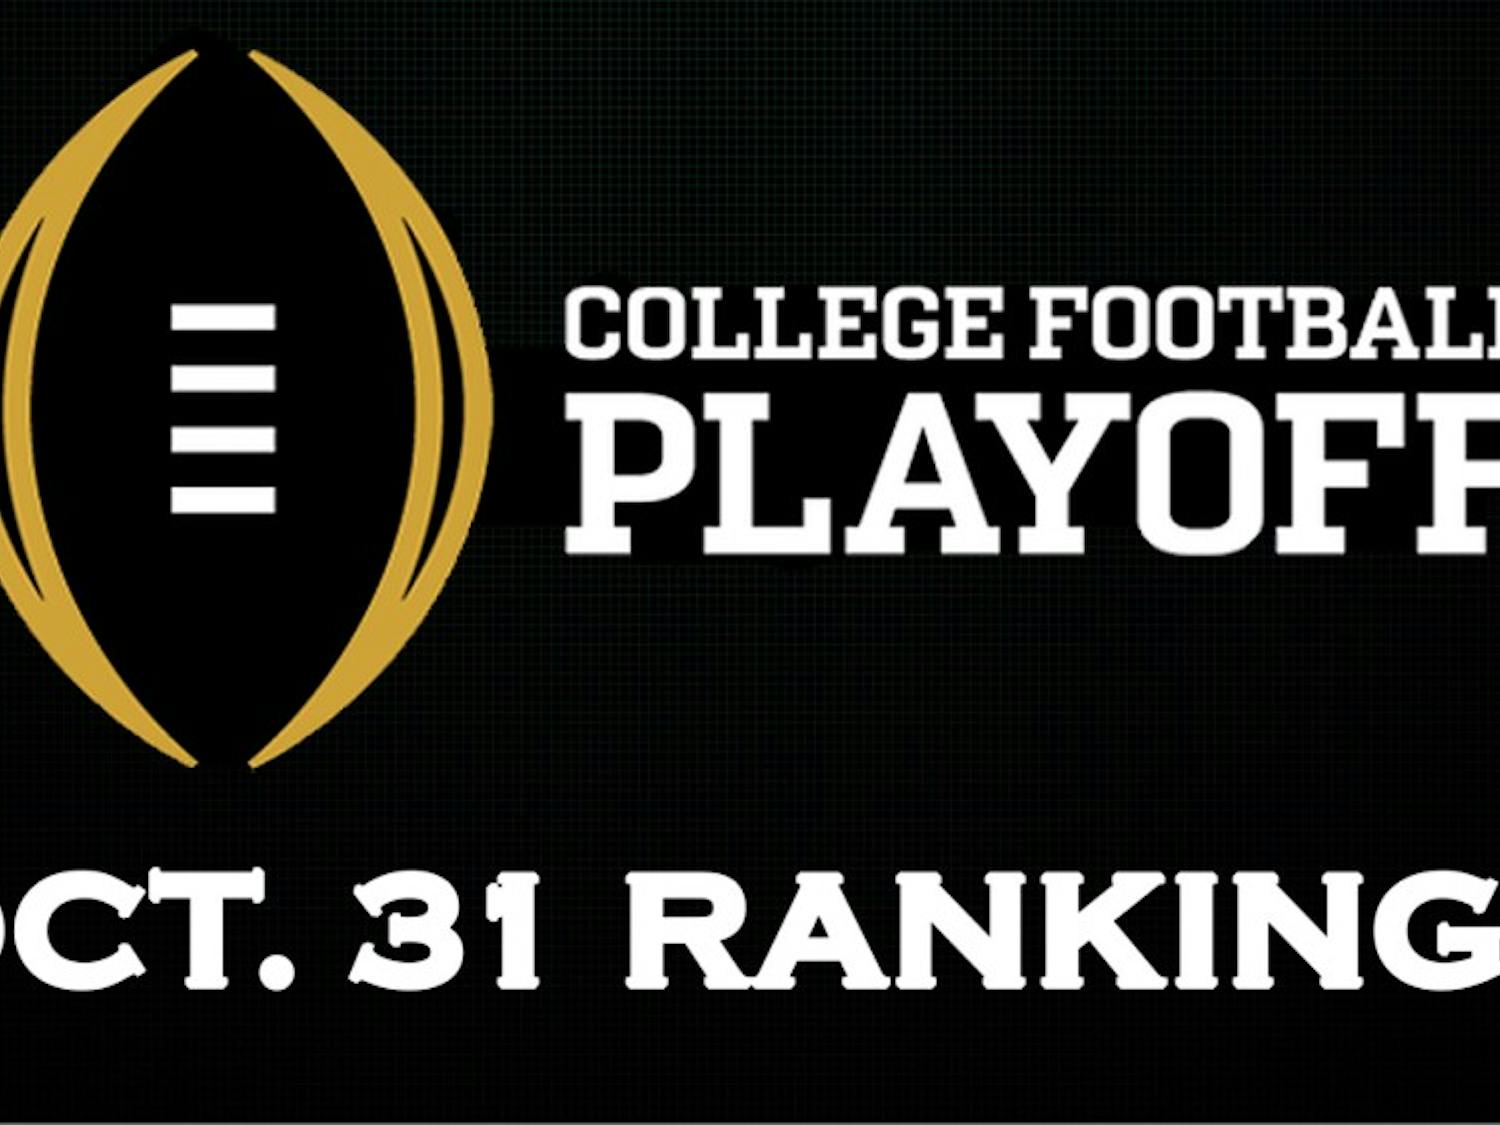 College Football Playoff October 31st Ranking